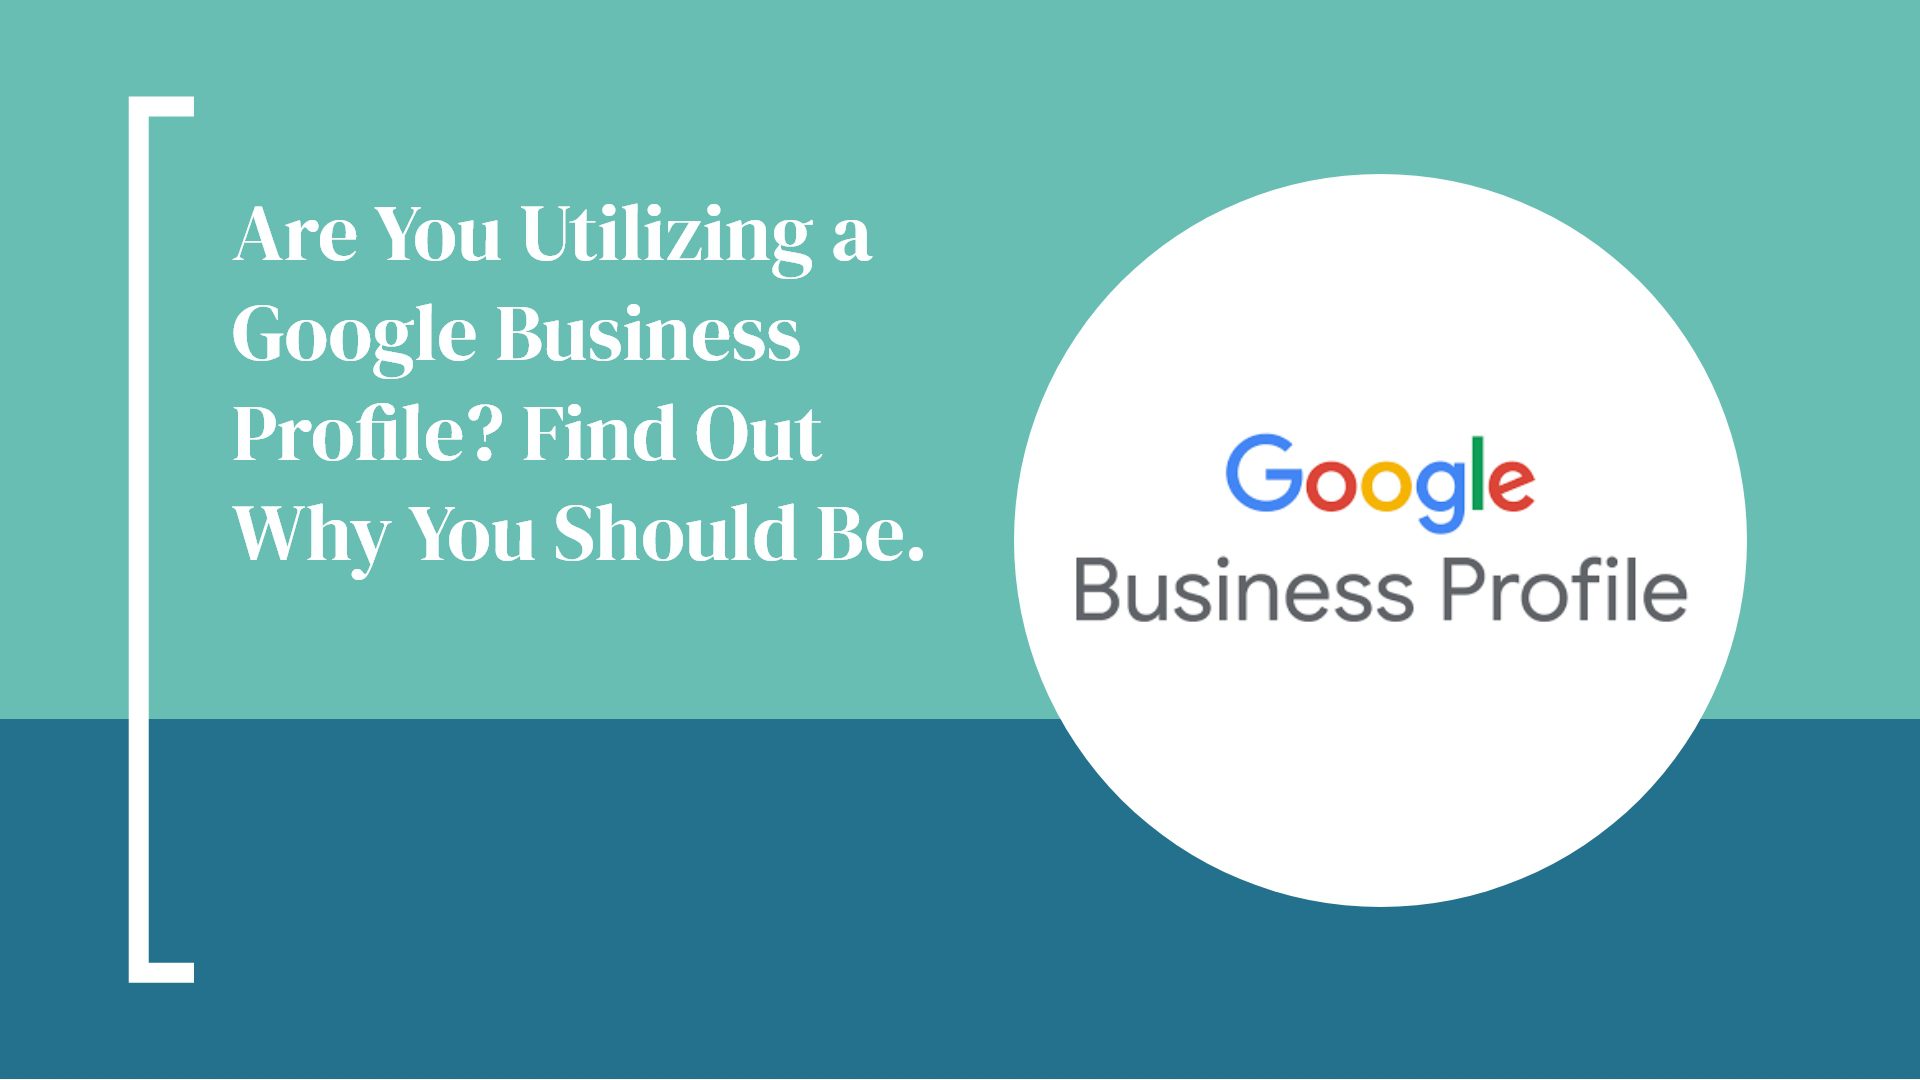 Are You Utilizing a Google Business Profile? Find Out Why You Should Be.